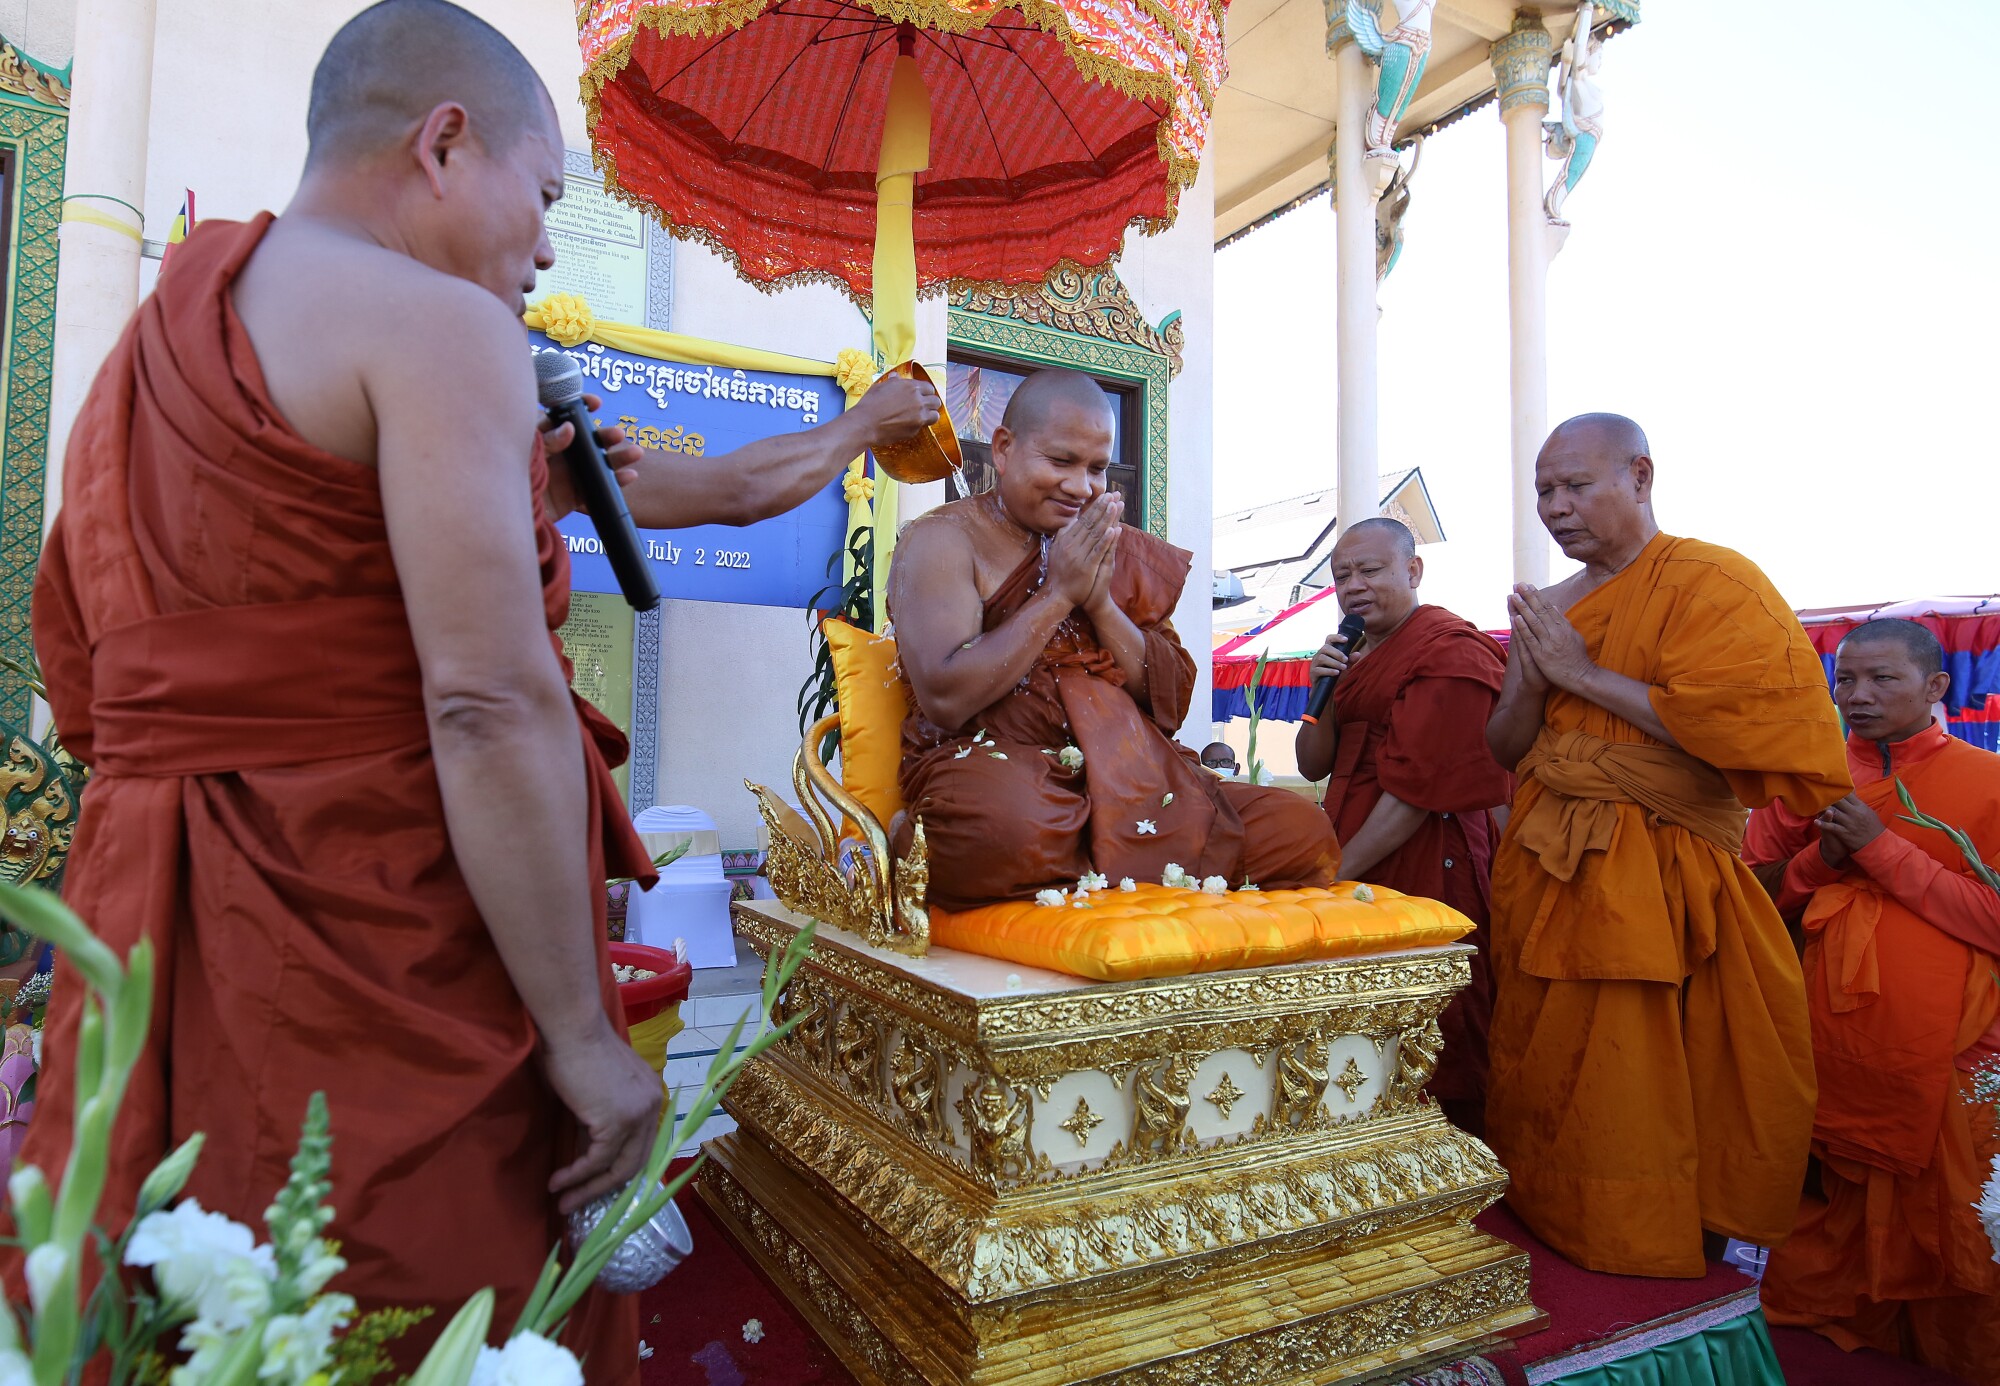 Temple abbot Sei Bunton (center) douses himself with holy water during a special ceremony.